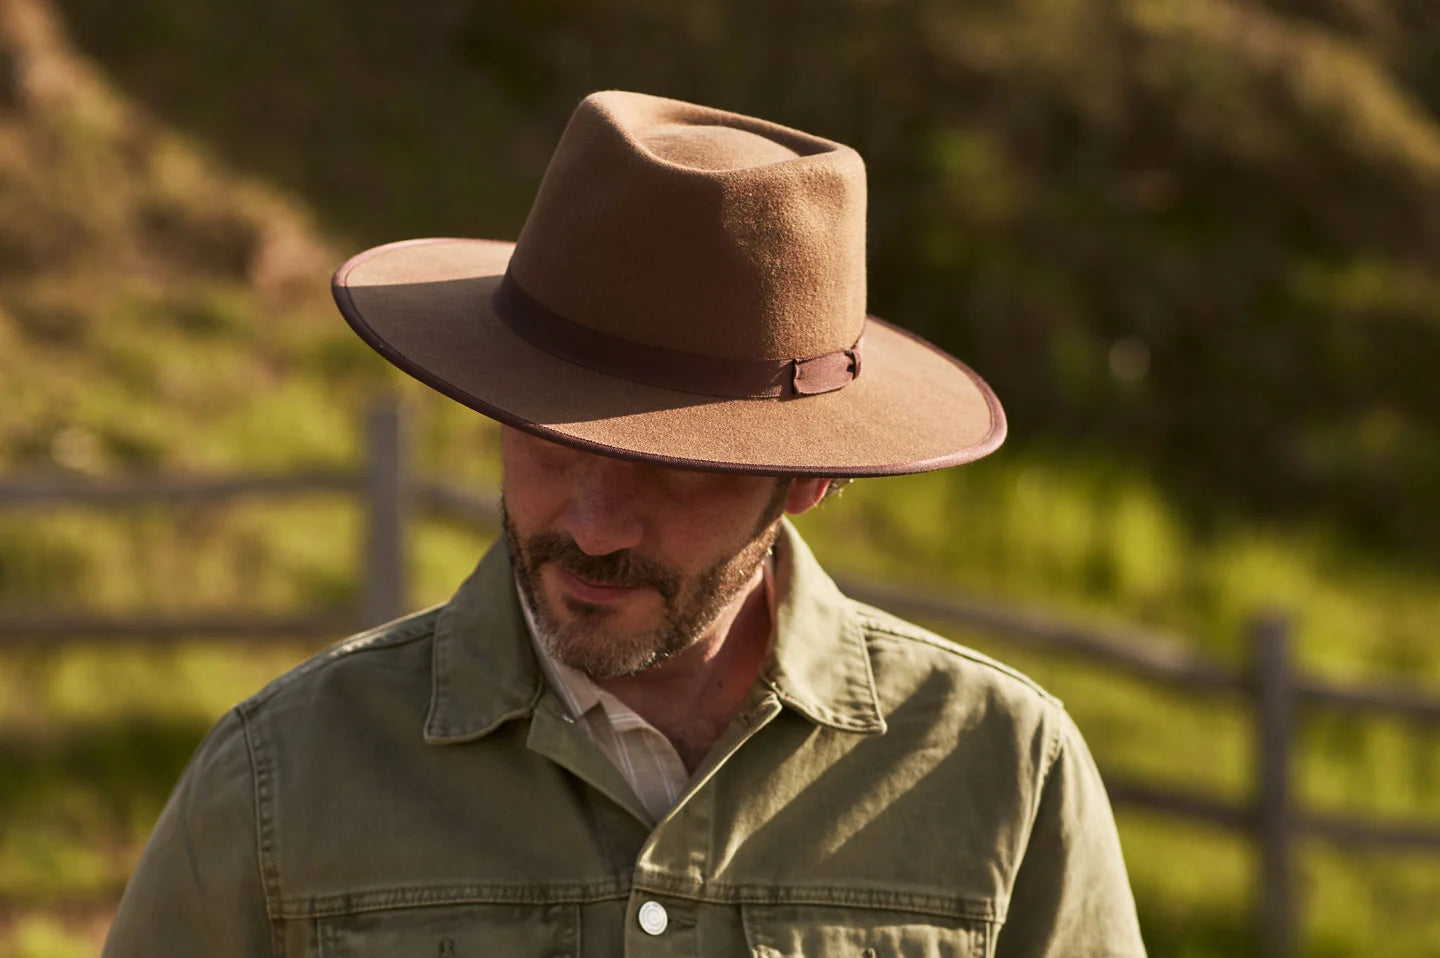 Man standing in field while wearing the Bondi mens wide brim hat by American Hat Makers